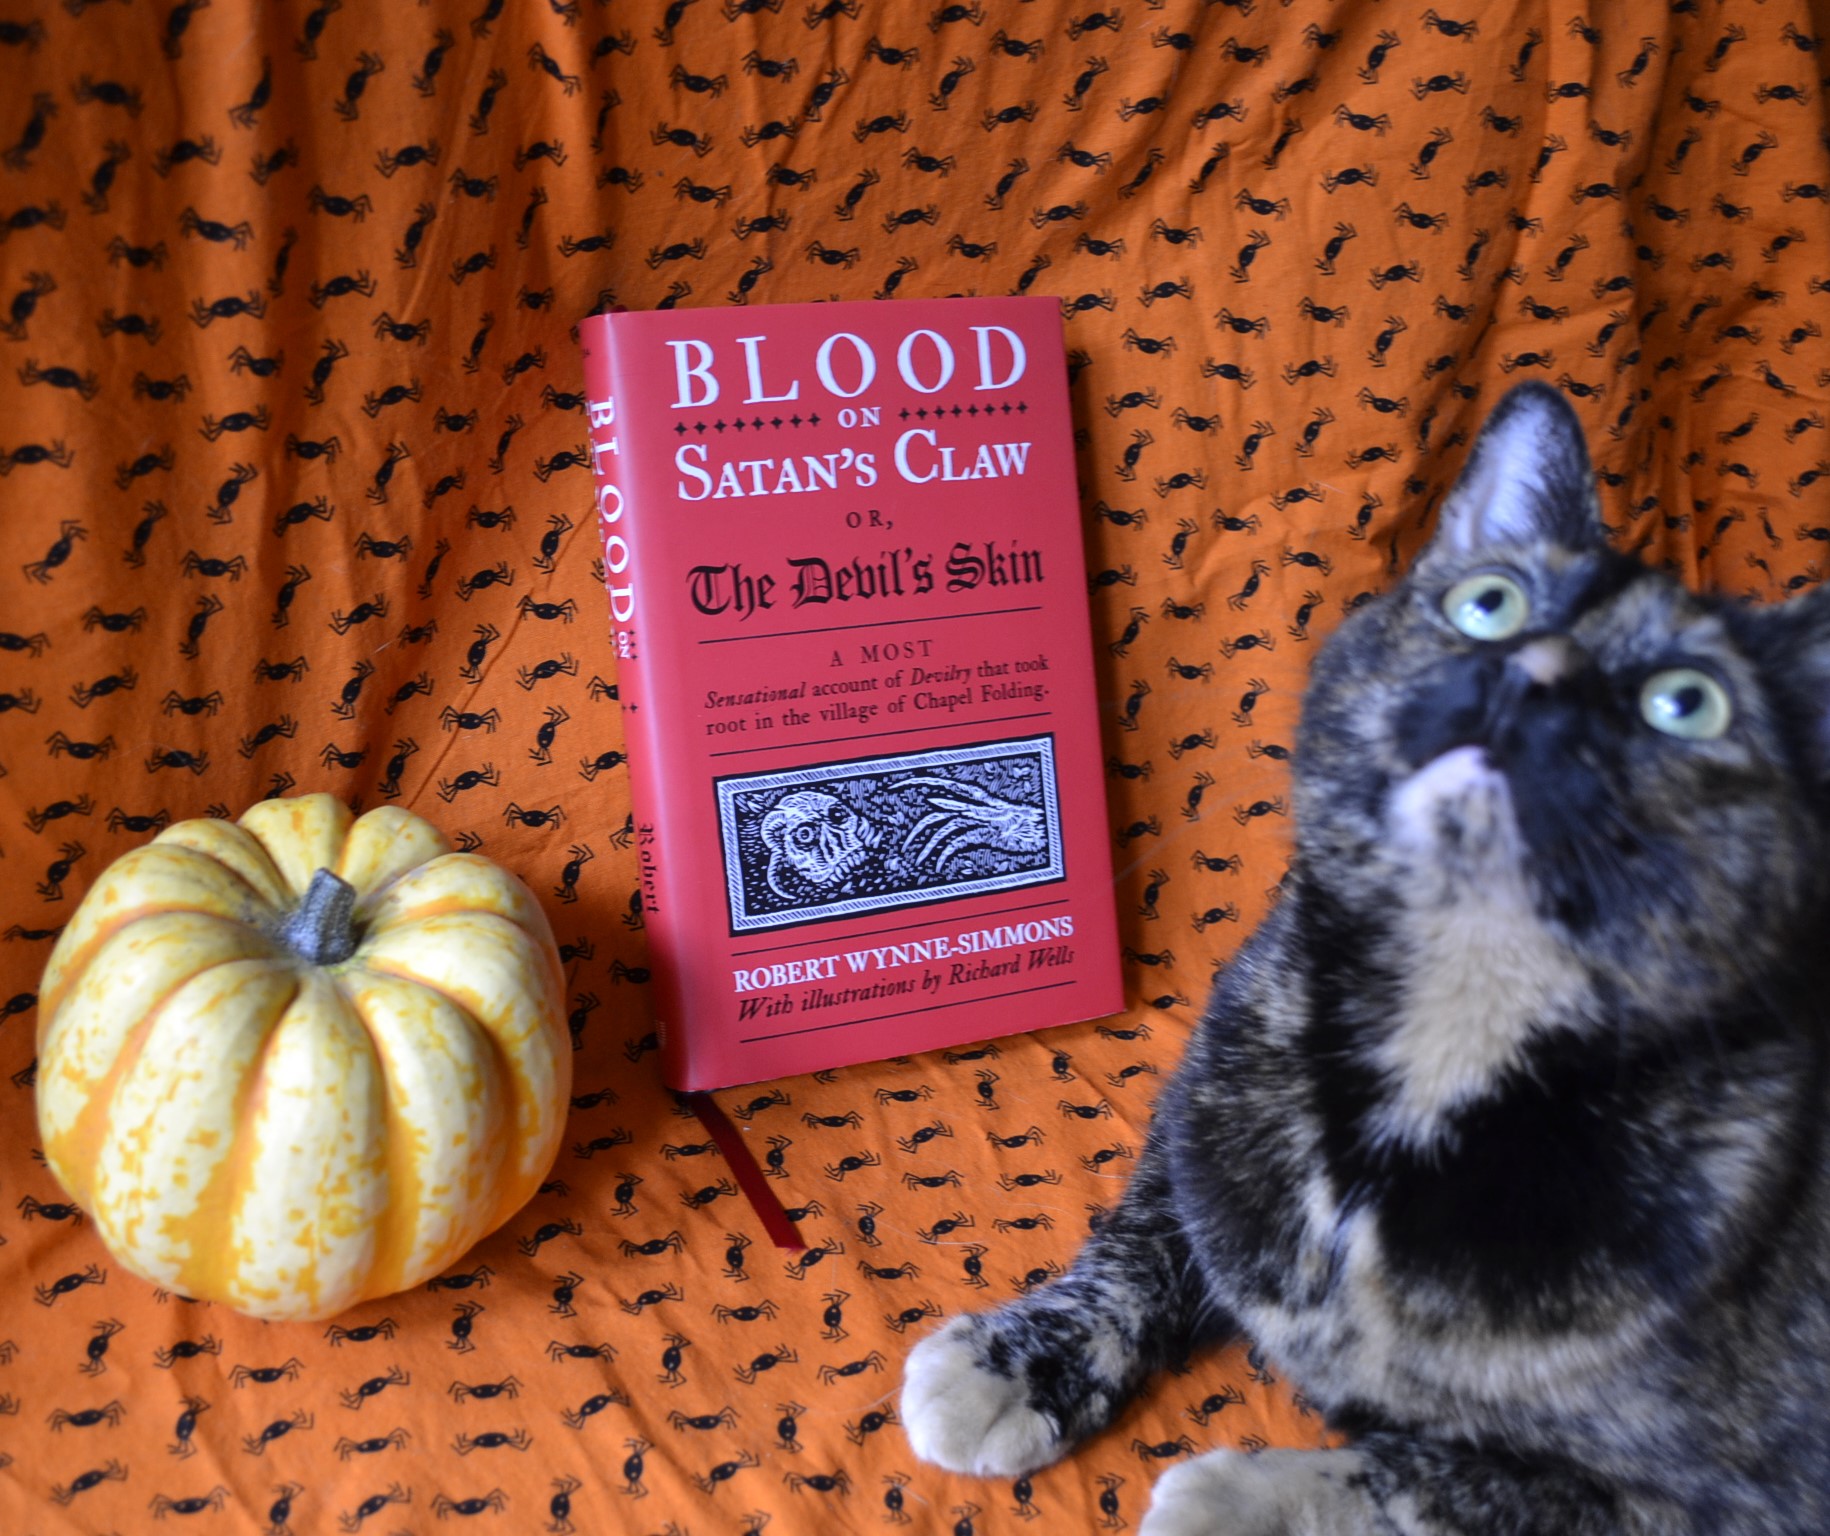 On an orange, spider-patterned background, a tortie sits with a squash and a red book. Sweetly, she looks up at the sky.